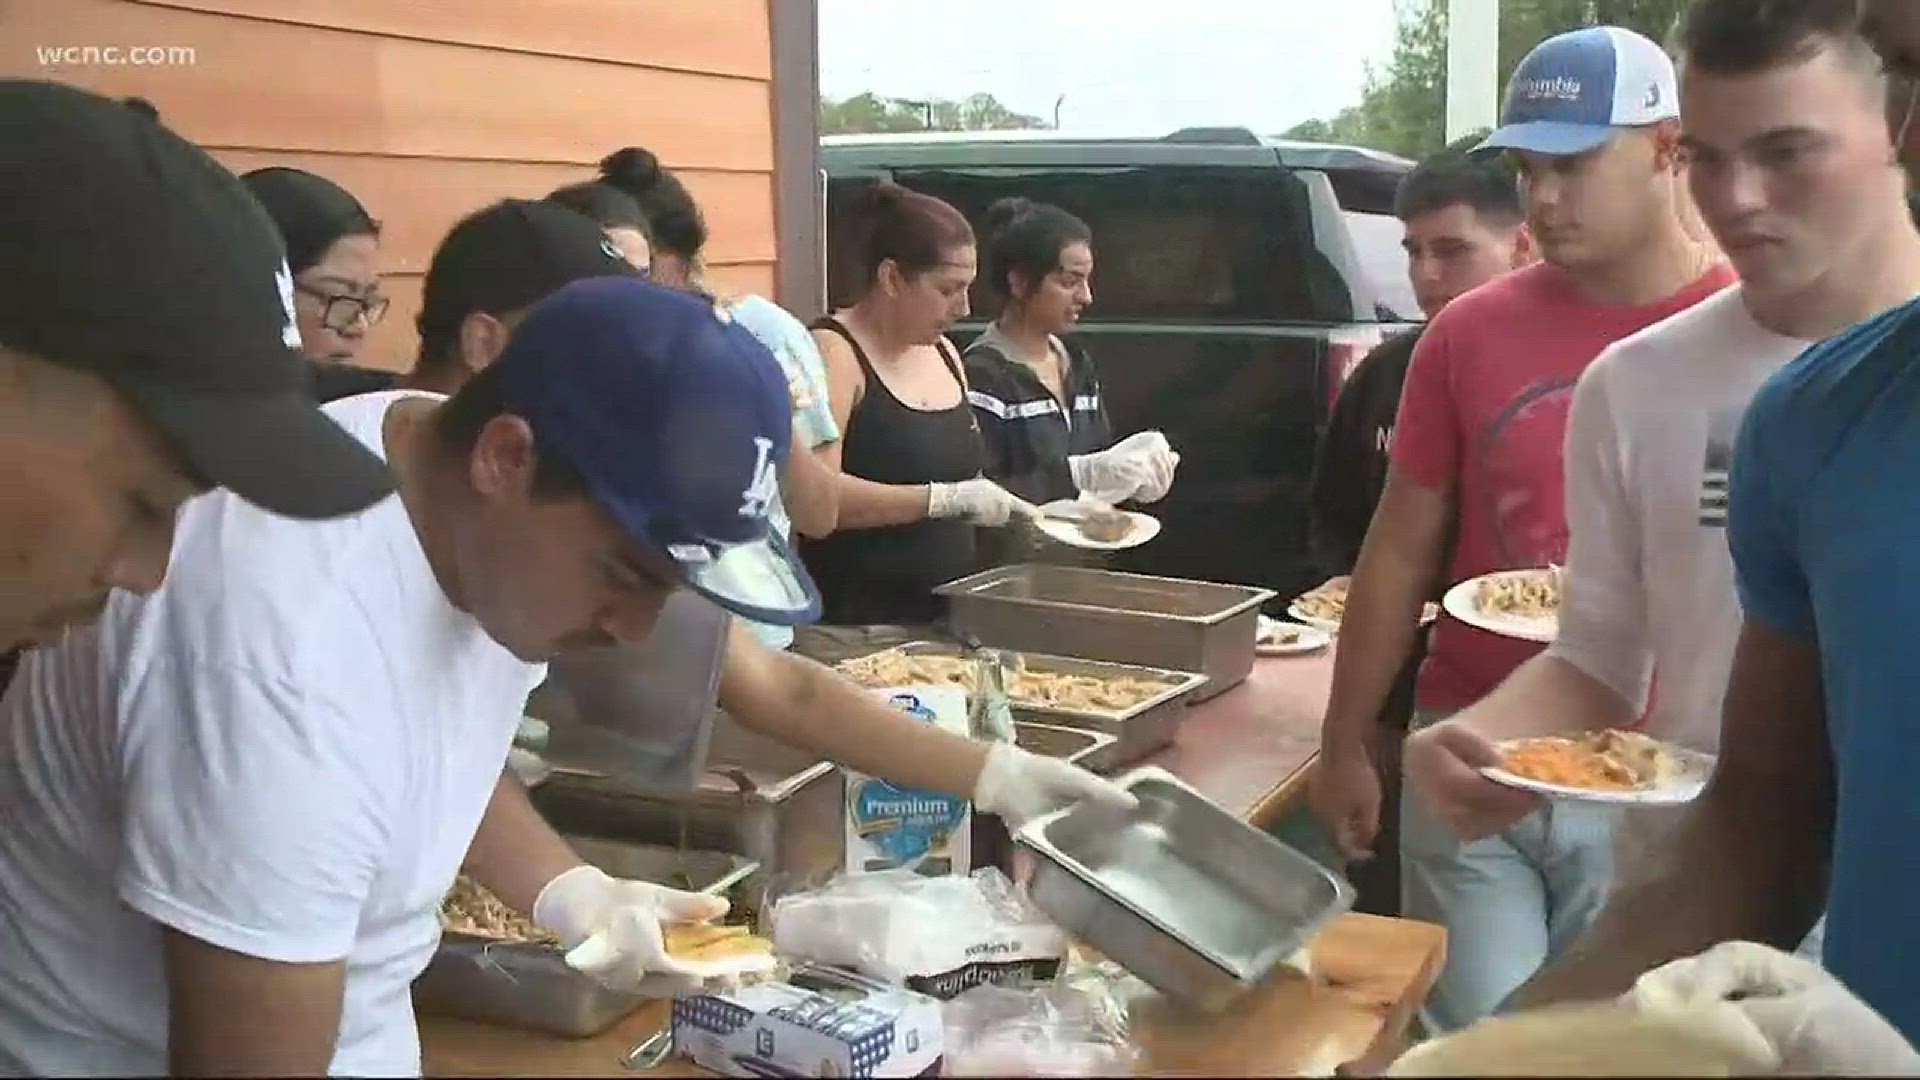 Even though they've lost power, employees at La Casa Del Patron in New Bern are serving hot meals to community members affected by Florence.